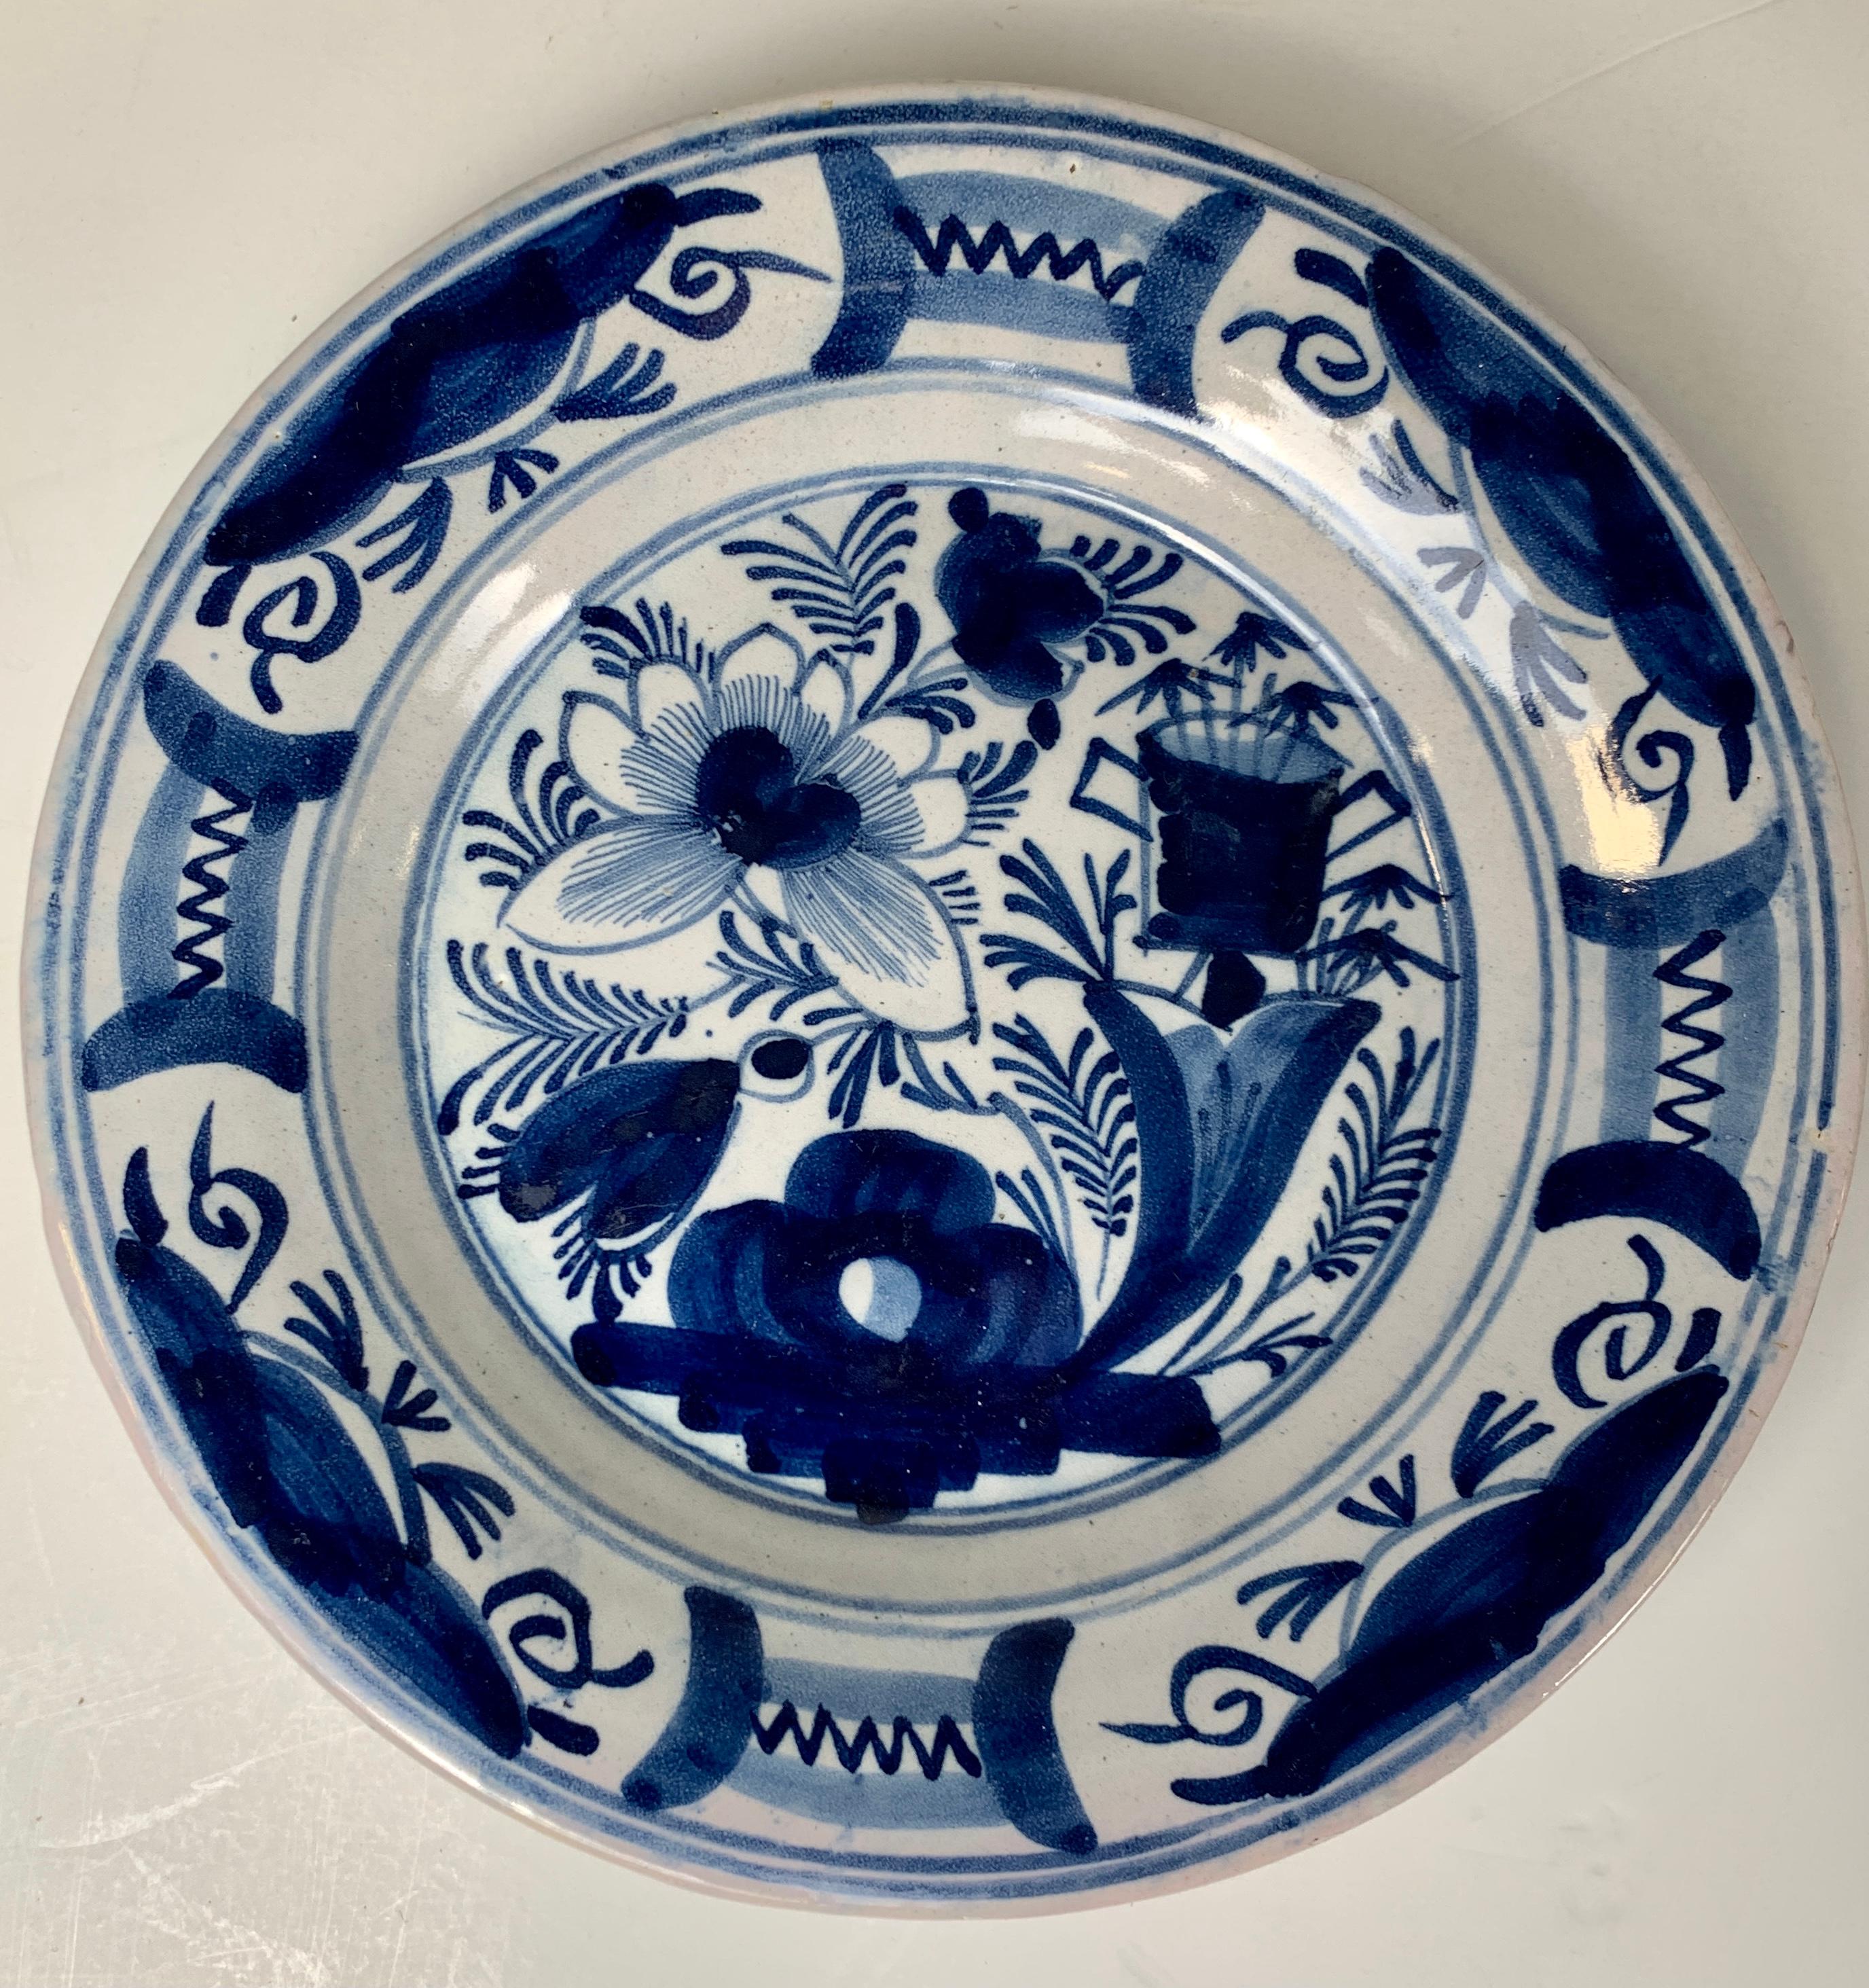 A set of four antique blue and white Dutch Delft dishes showing flowers, a vase, and a pieced rock.
The deep cobalt blue is splendid on the bright white tin glaze background.
The border is filled with four panels each with a floral design. Between